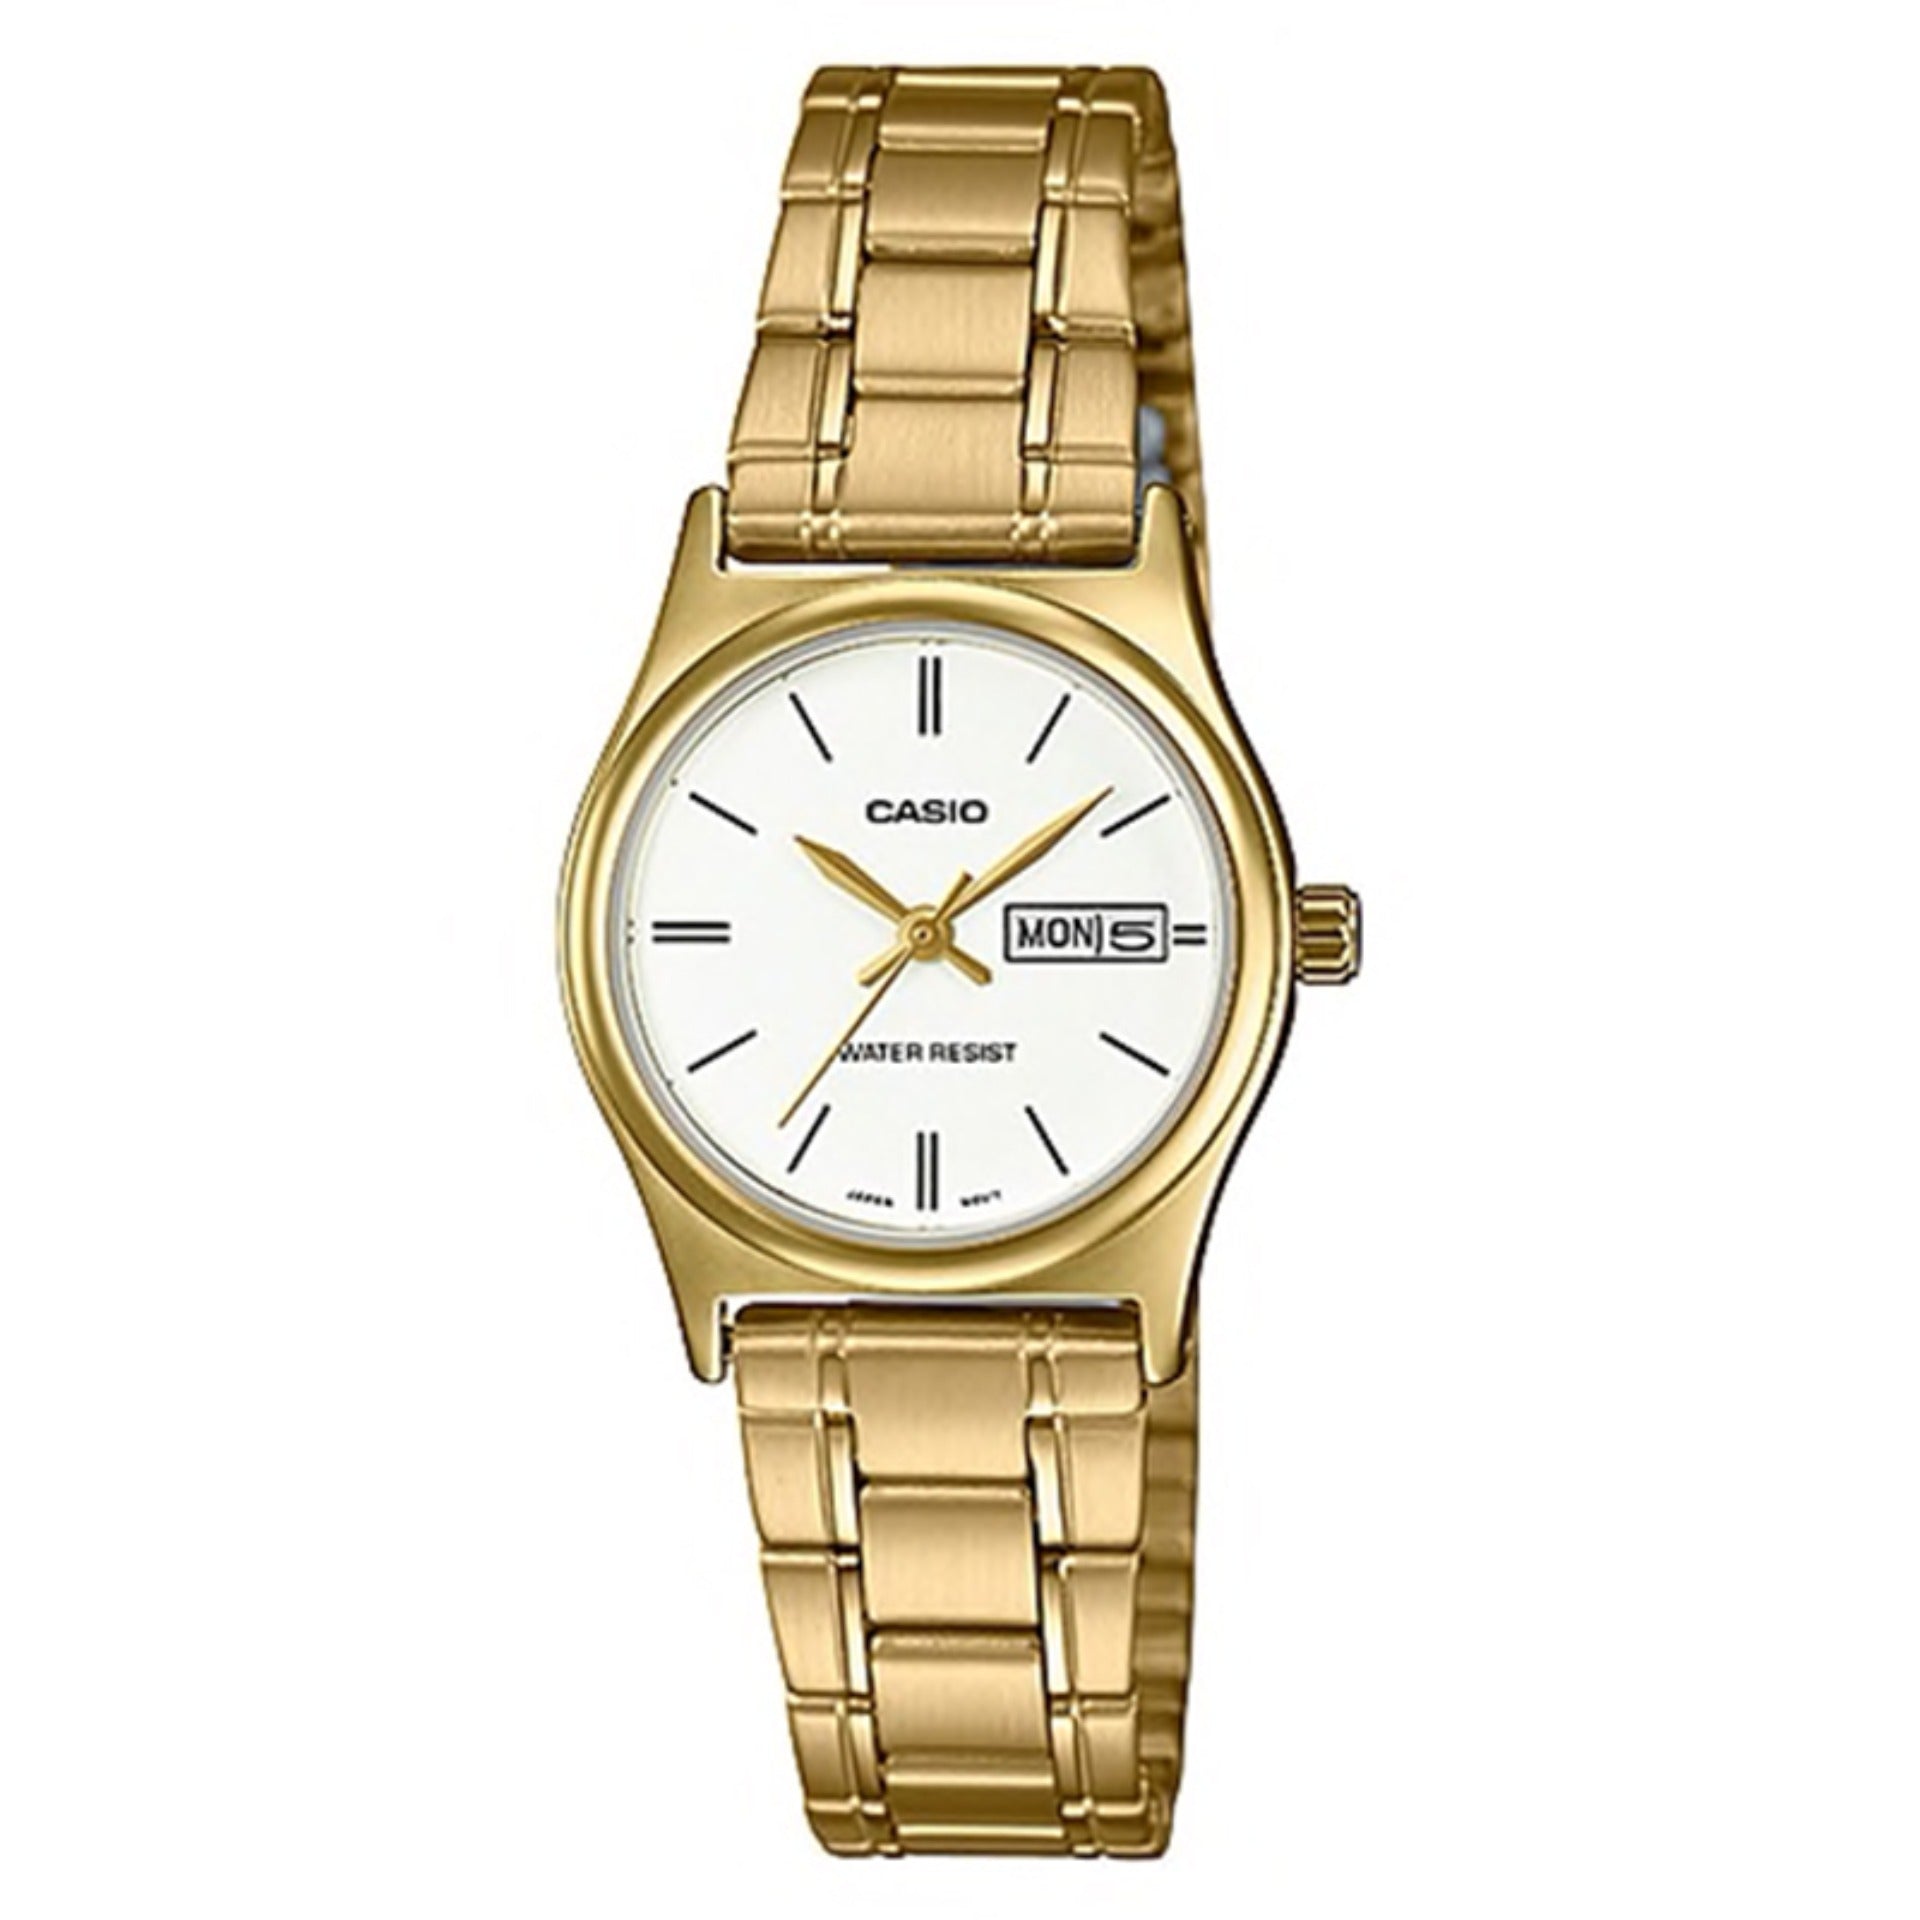 Casio Ladies' Standard Analog Gold Ion Plated Stainless Steel Band Watch LTPV006G-7B LTP-V006G-7B Watchspree